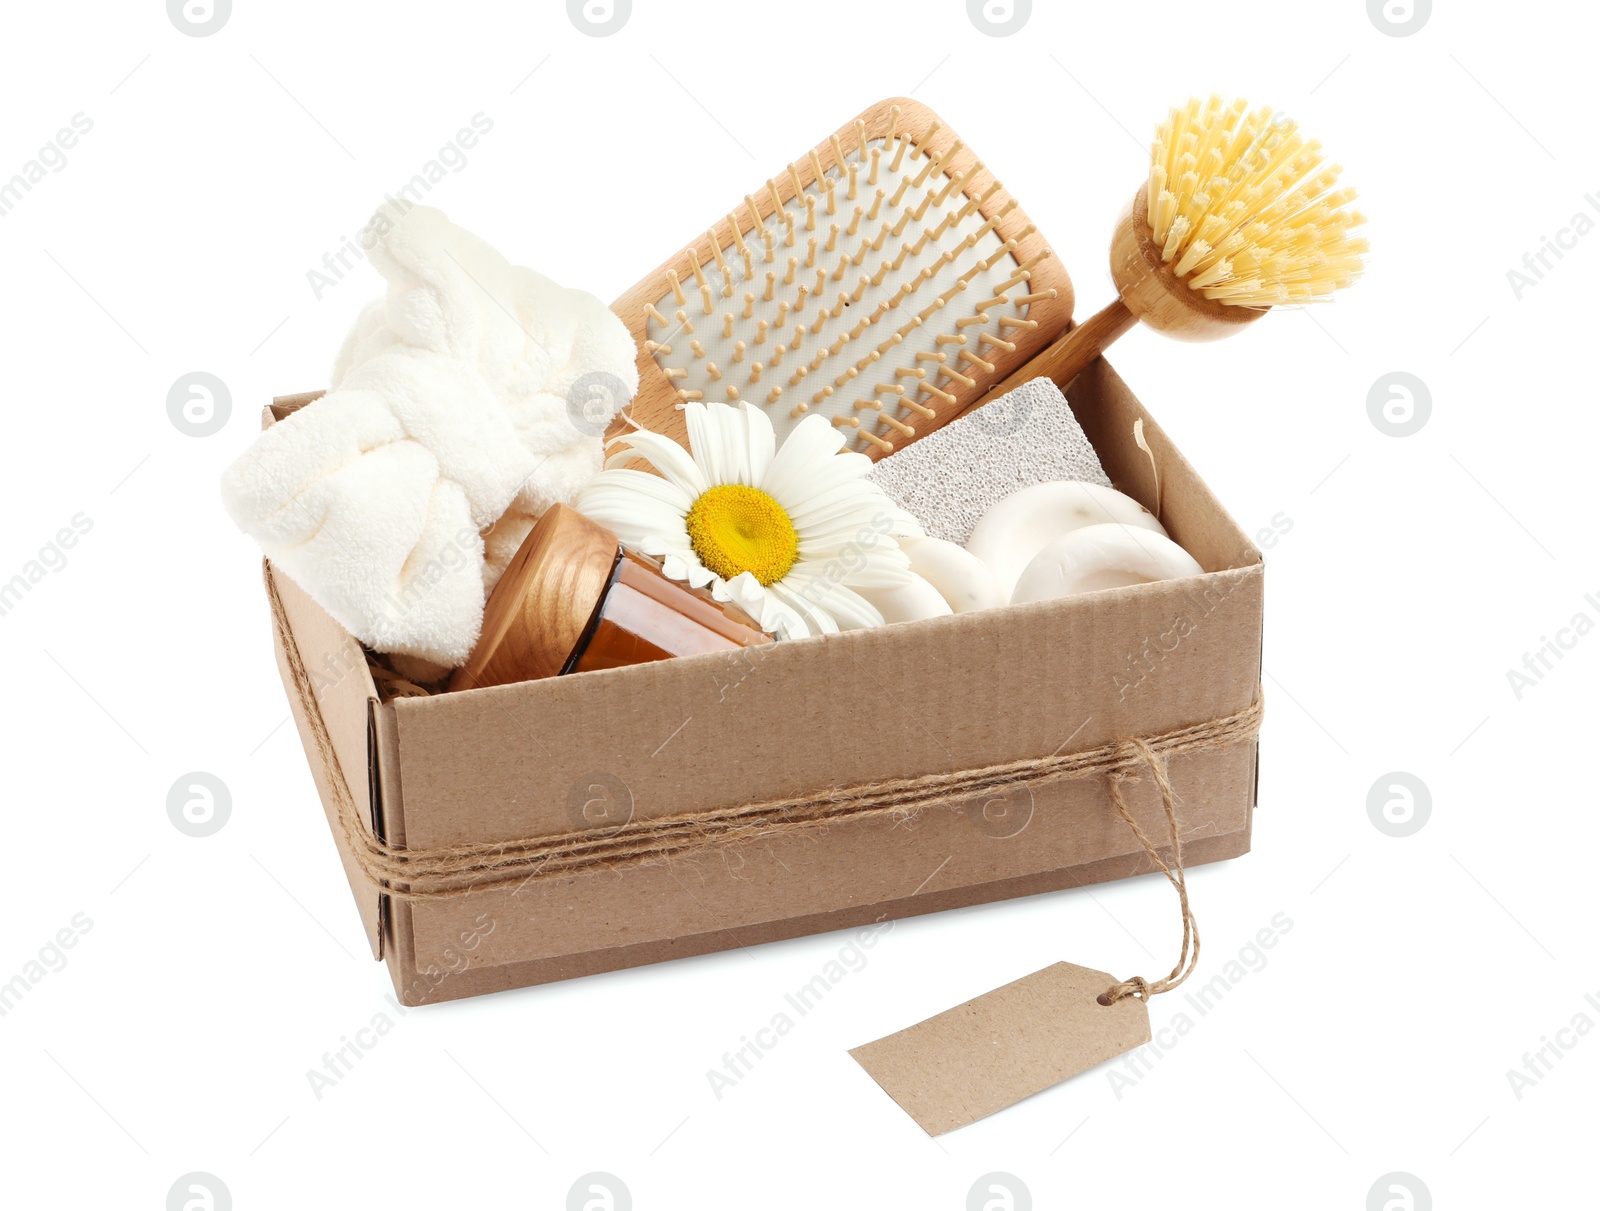 Photo of Spa gift set of different luxury products in cardboard box on white background